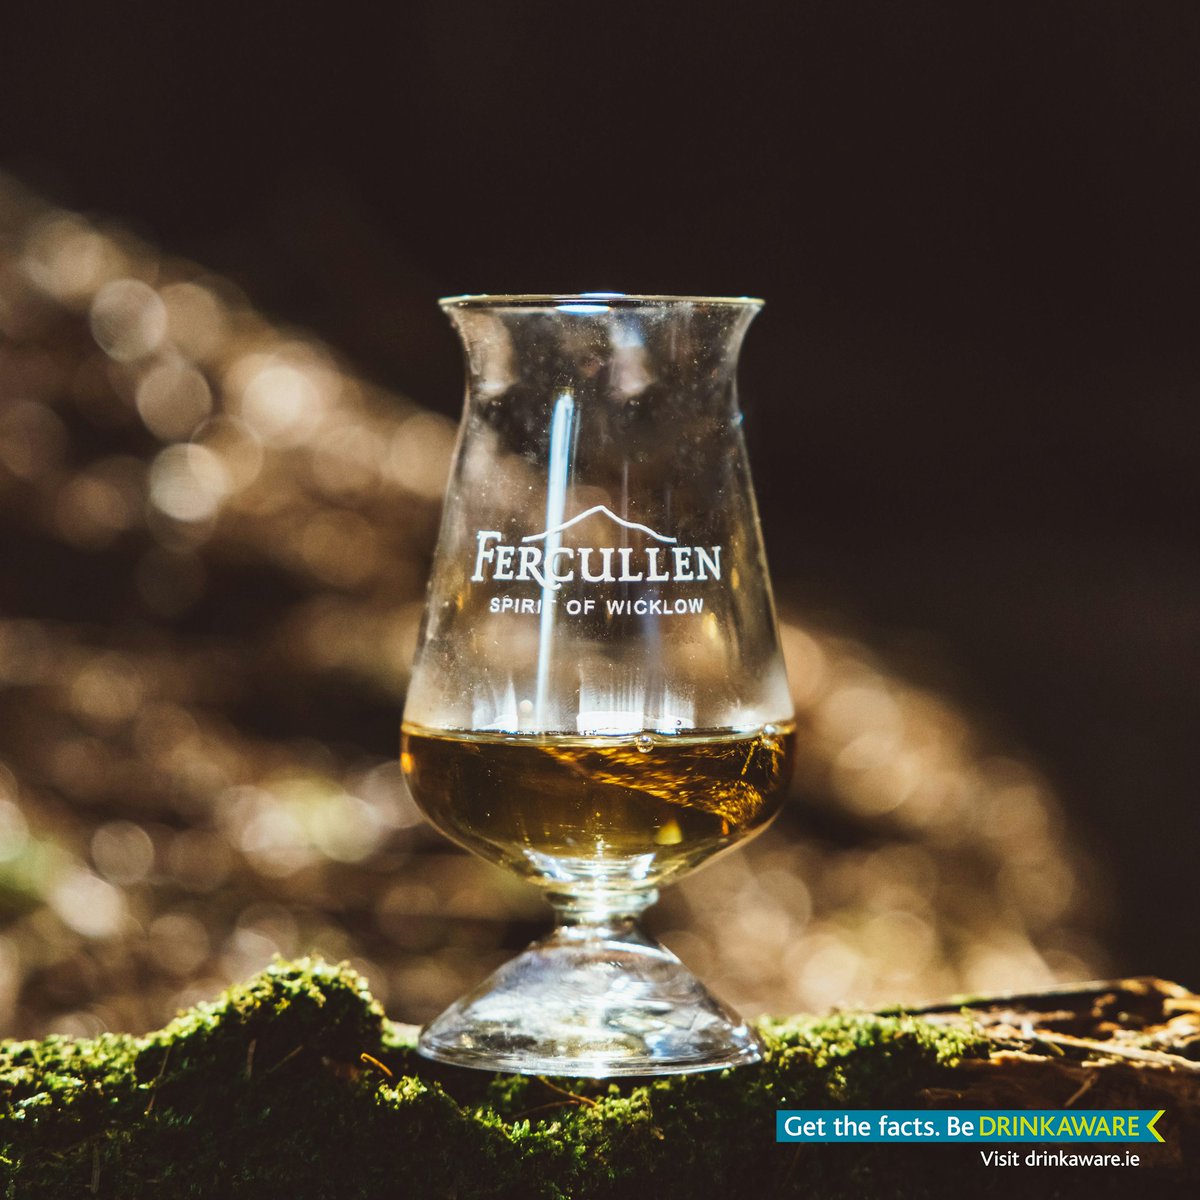 At Fercullen Whiskey, we are passionate about the quality of our whiskey and most importantly, how YOU enjoy it!

This Irish Whiskey Day, join us in savouring the true Spirit of Wicklow and share your favourite tipple!

Sláinte 🥃

#IrishWhiskeyDay #WhiskeyLovers #IrishWhiskey